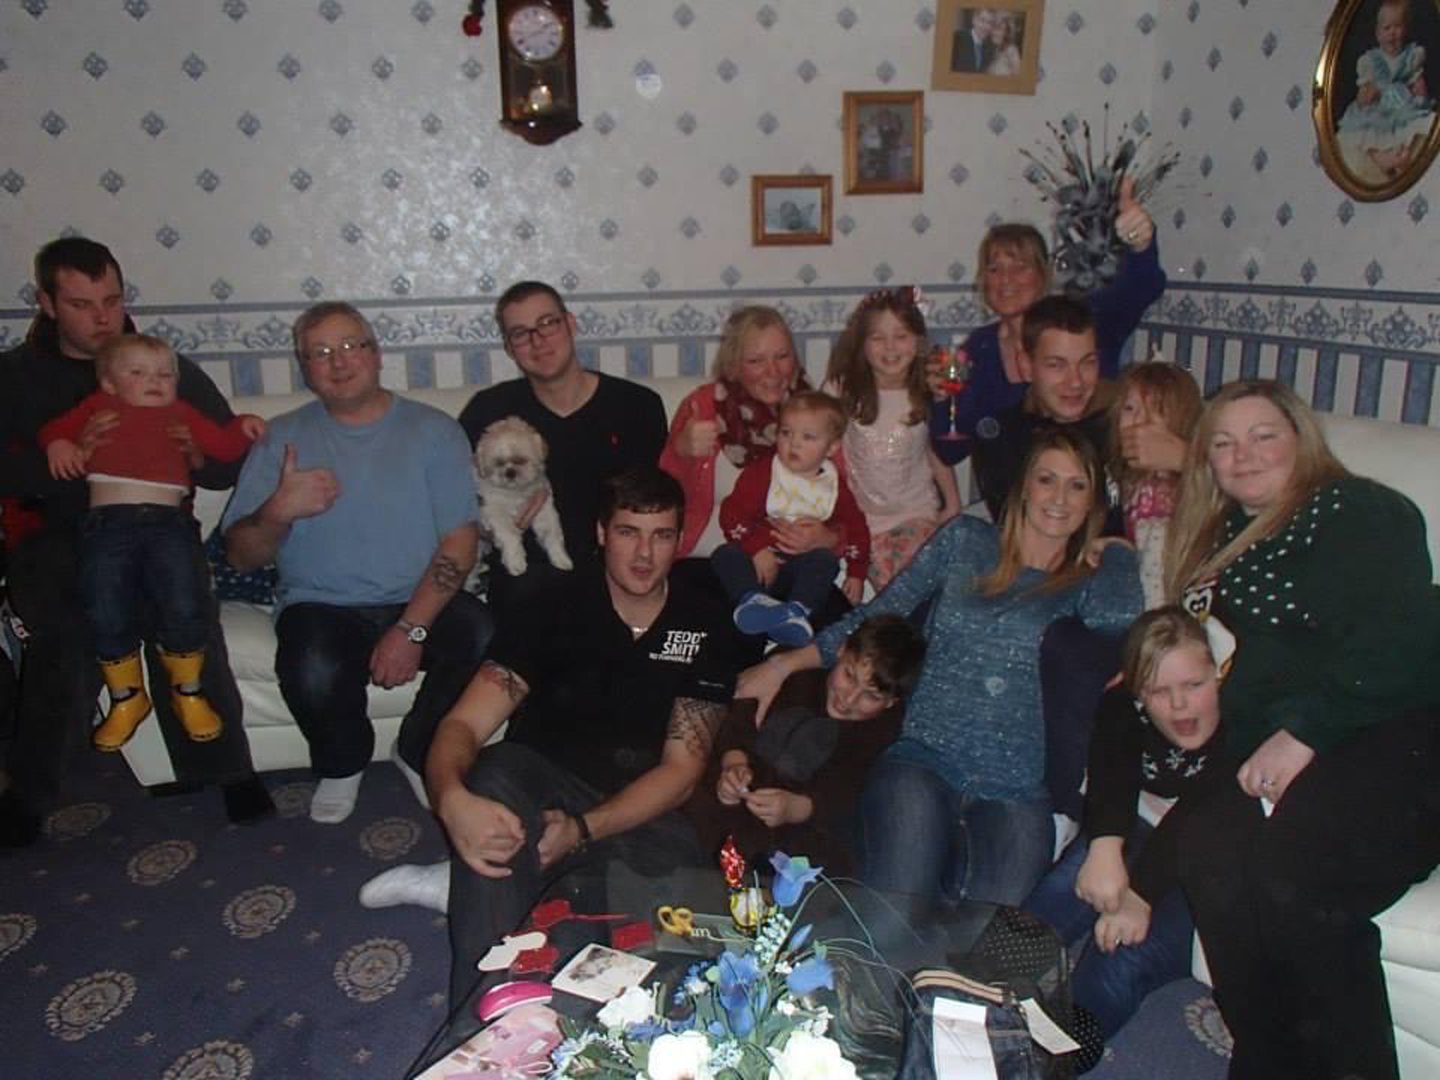 A group photo of Tommy with his extended family.